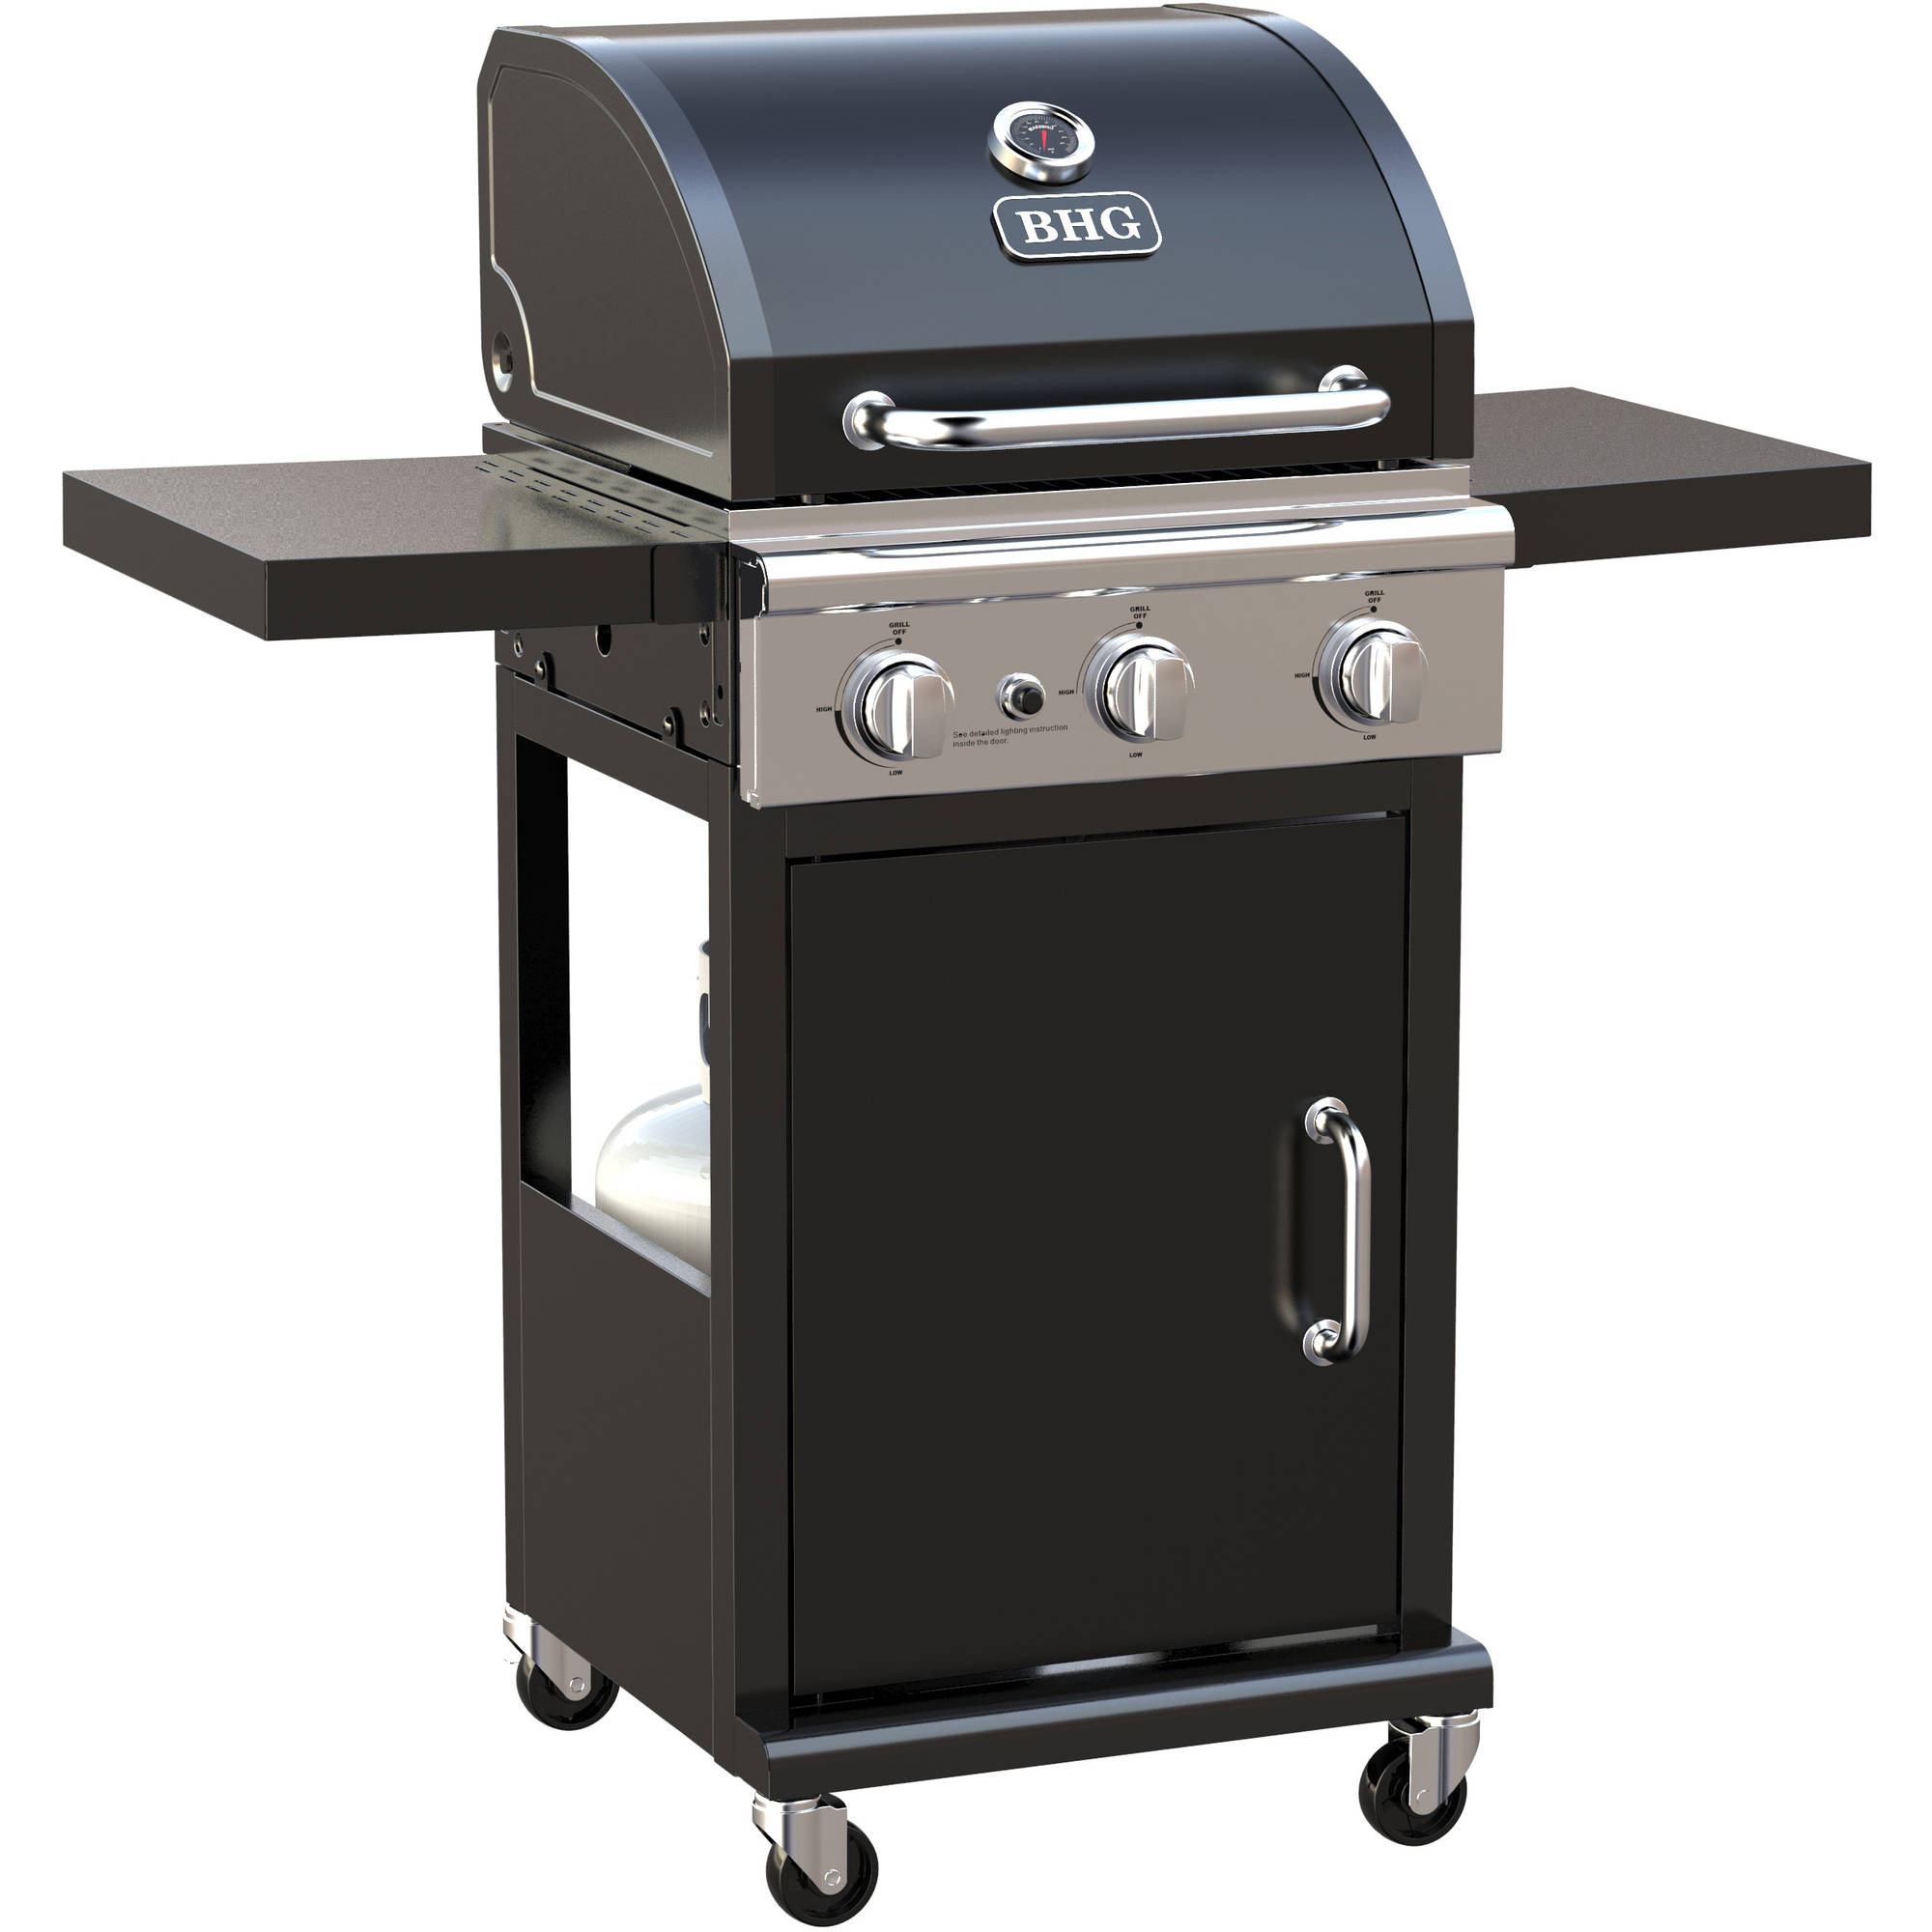 Better Homes and Gardens 3-Burner Gas Grill - image 1 of 7